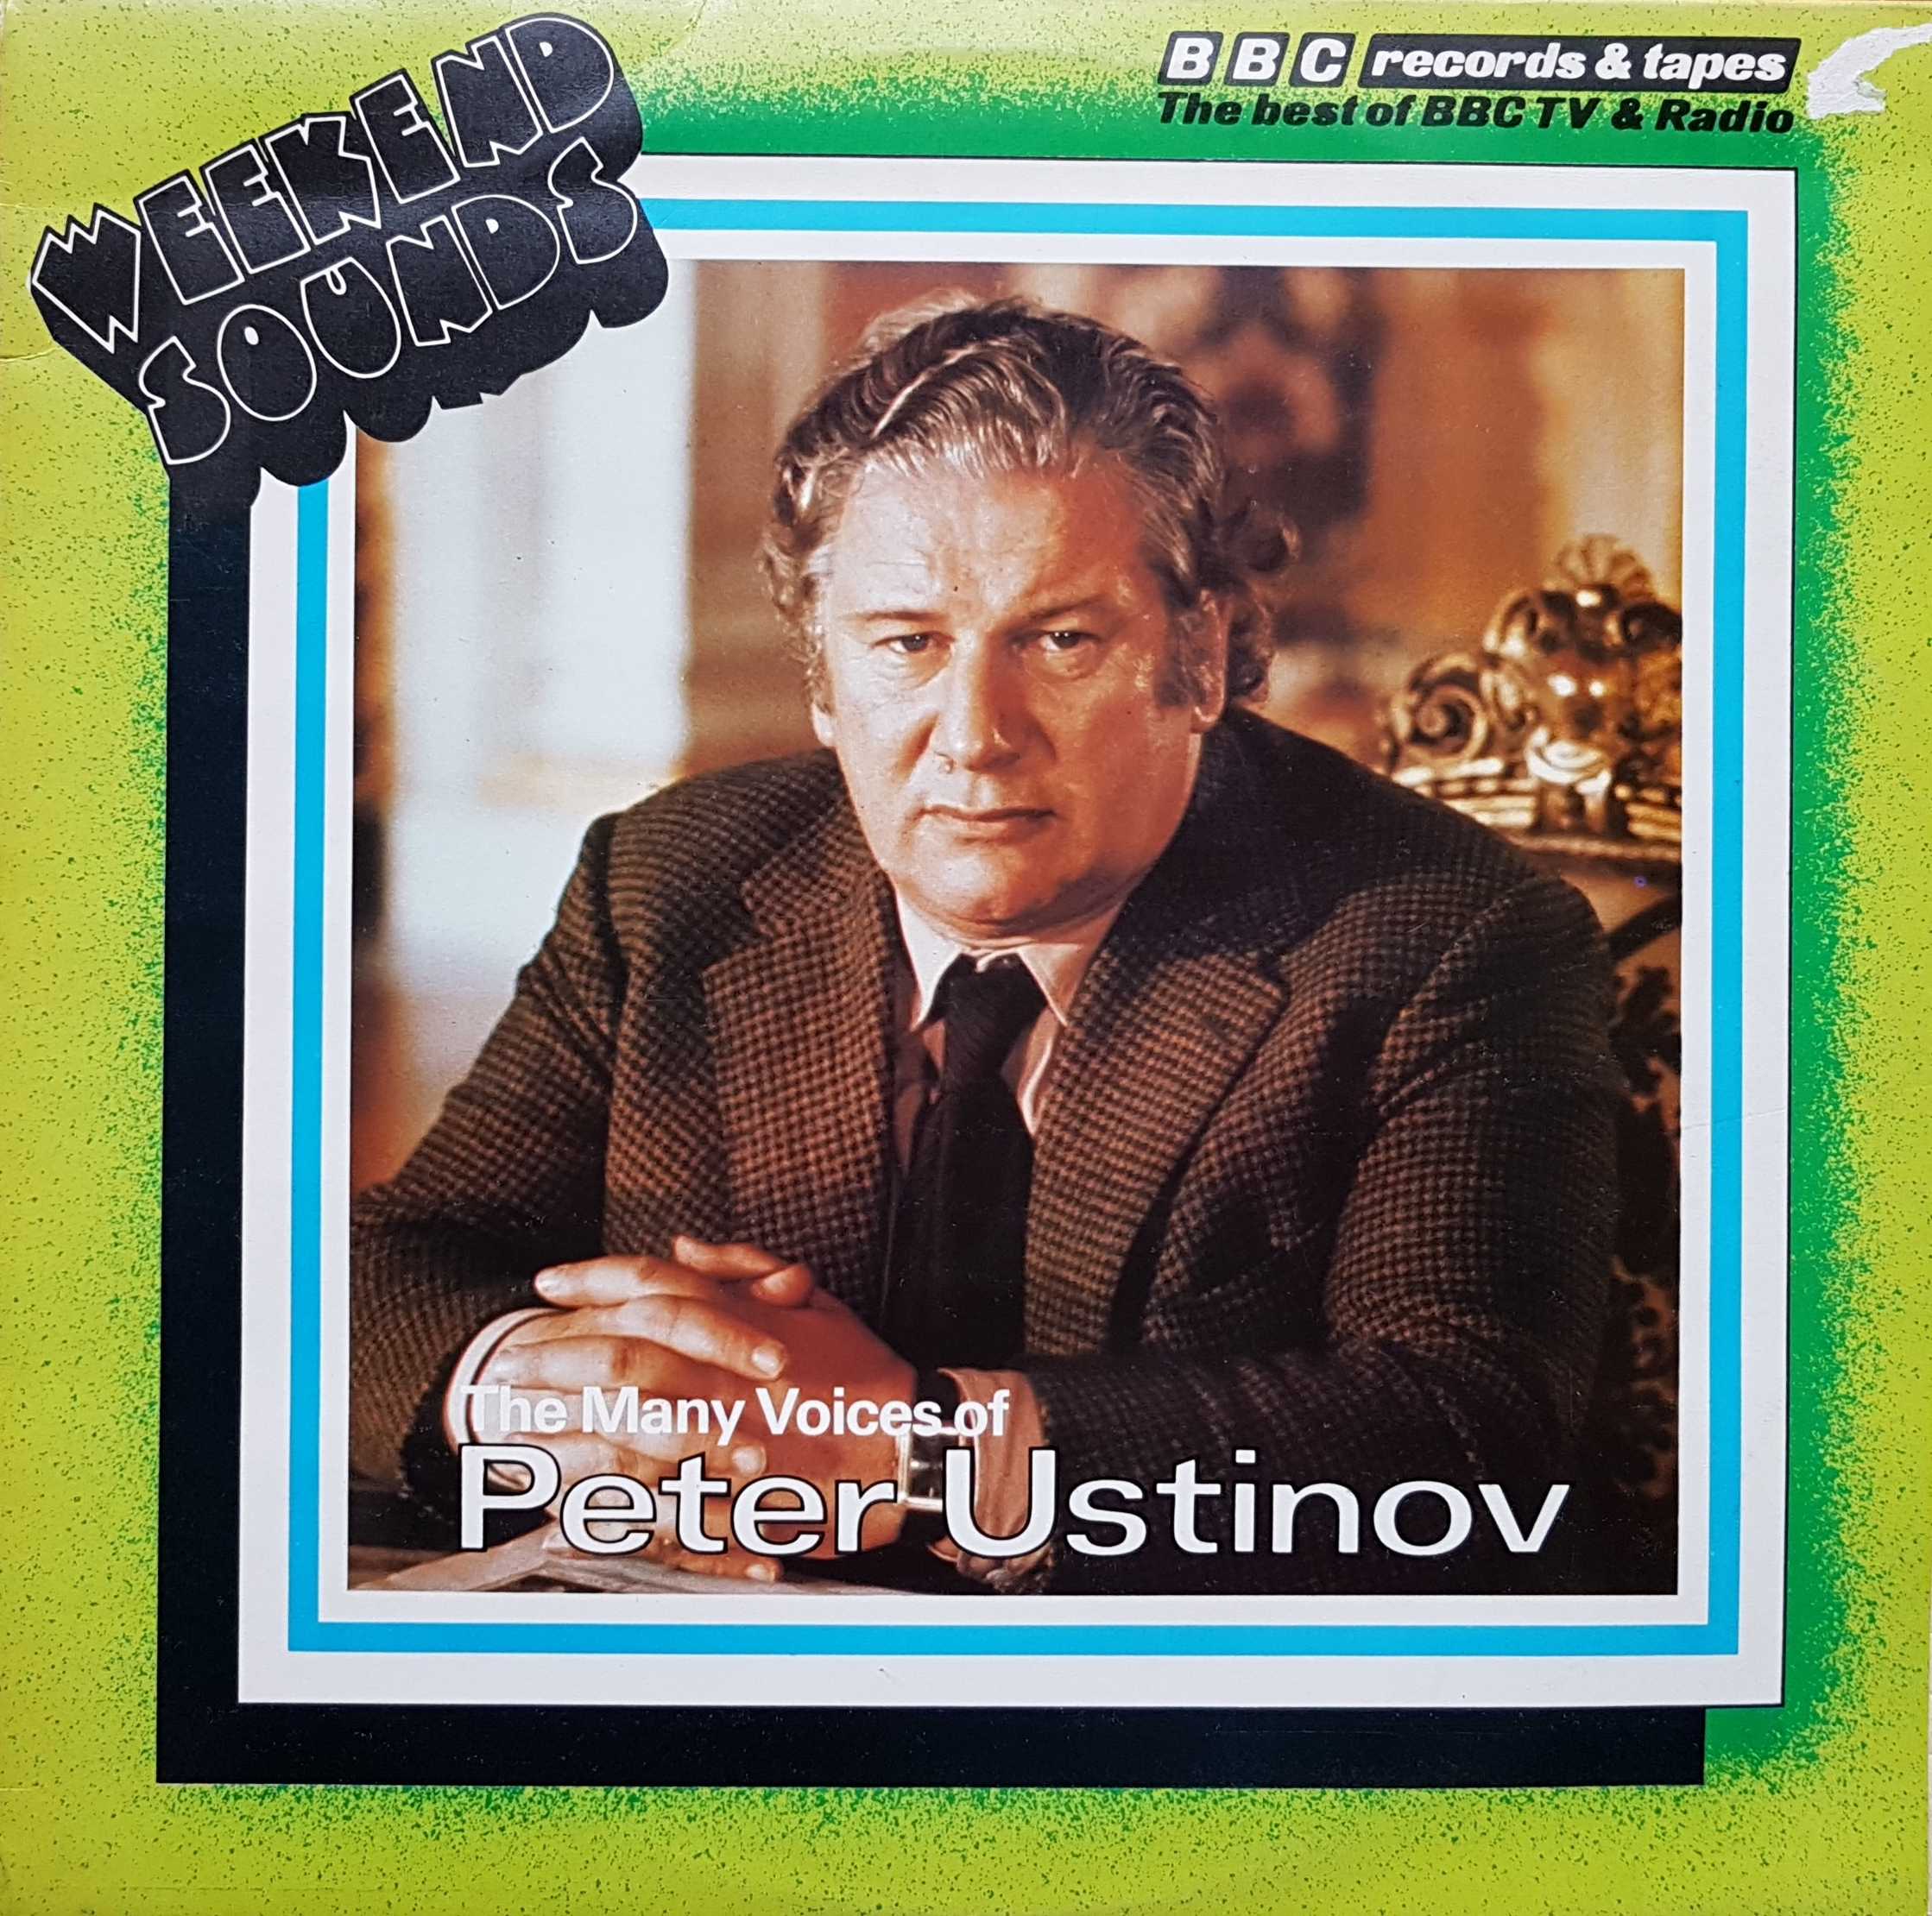 Picture of REC 248 The many voices of Peter Ustinov by artist Peter Ustinov from the BBC albums - Records and Tapes library